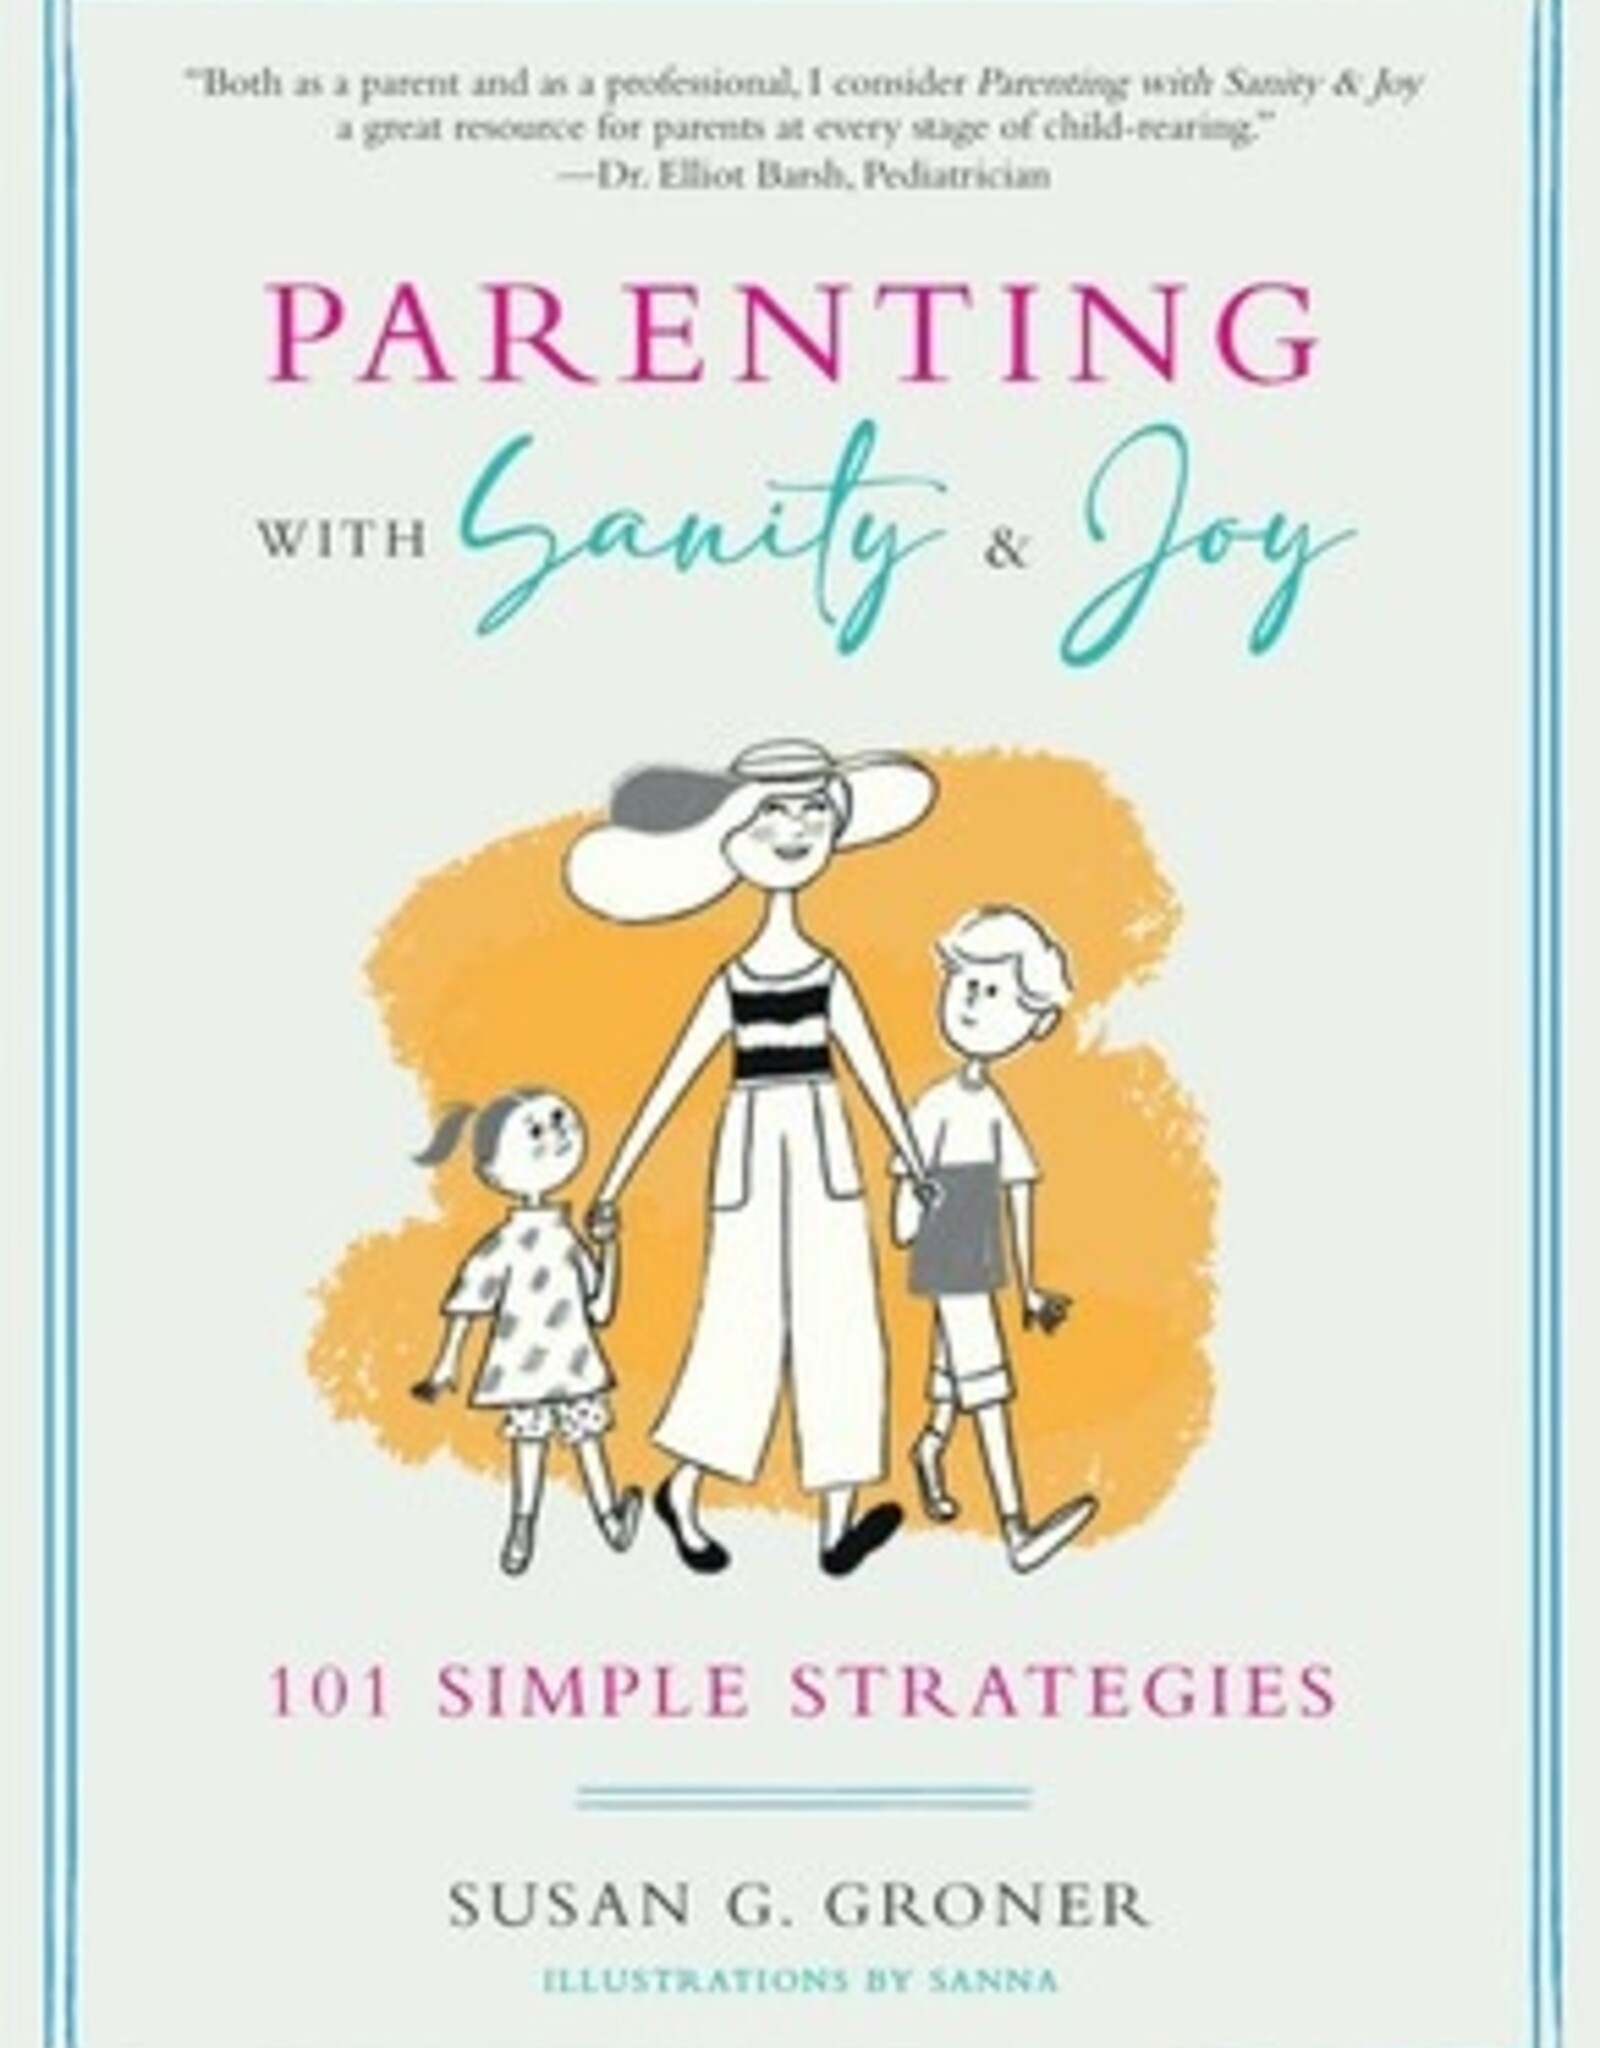 Simon & Schuster Parenting with Sanity & Joy